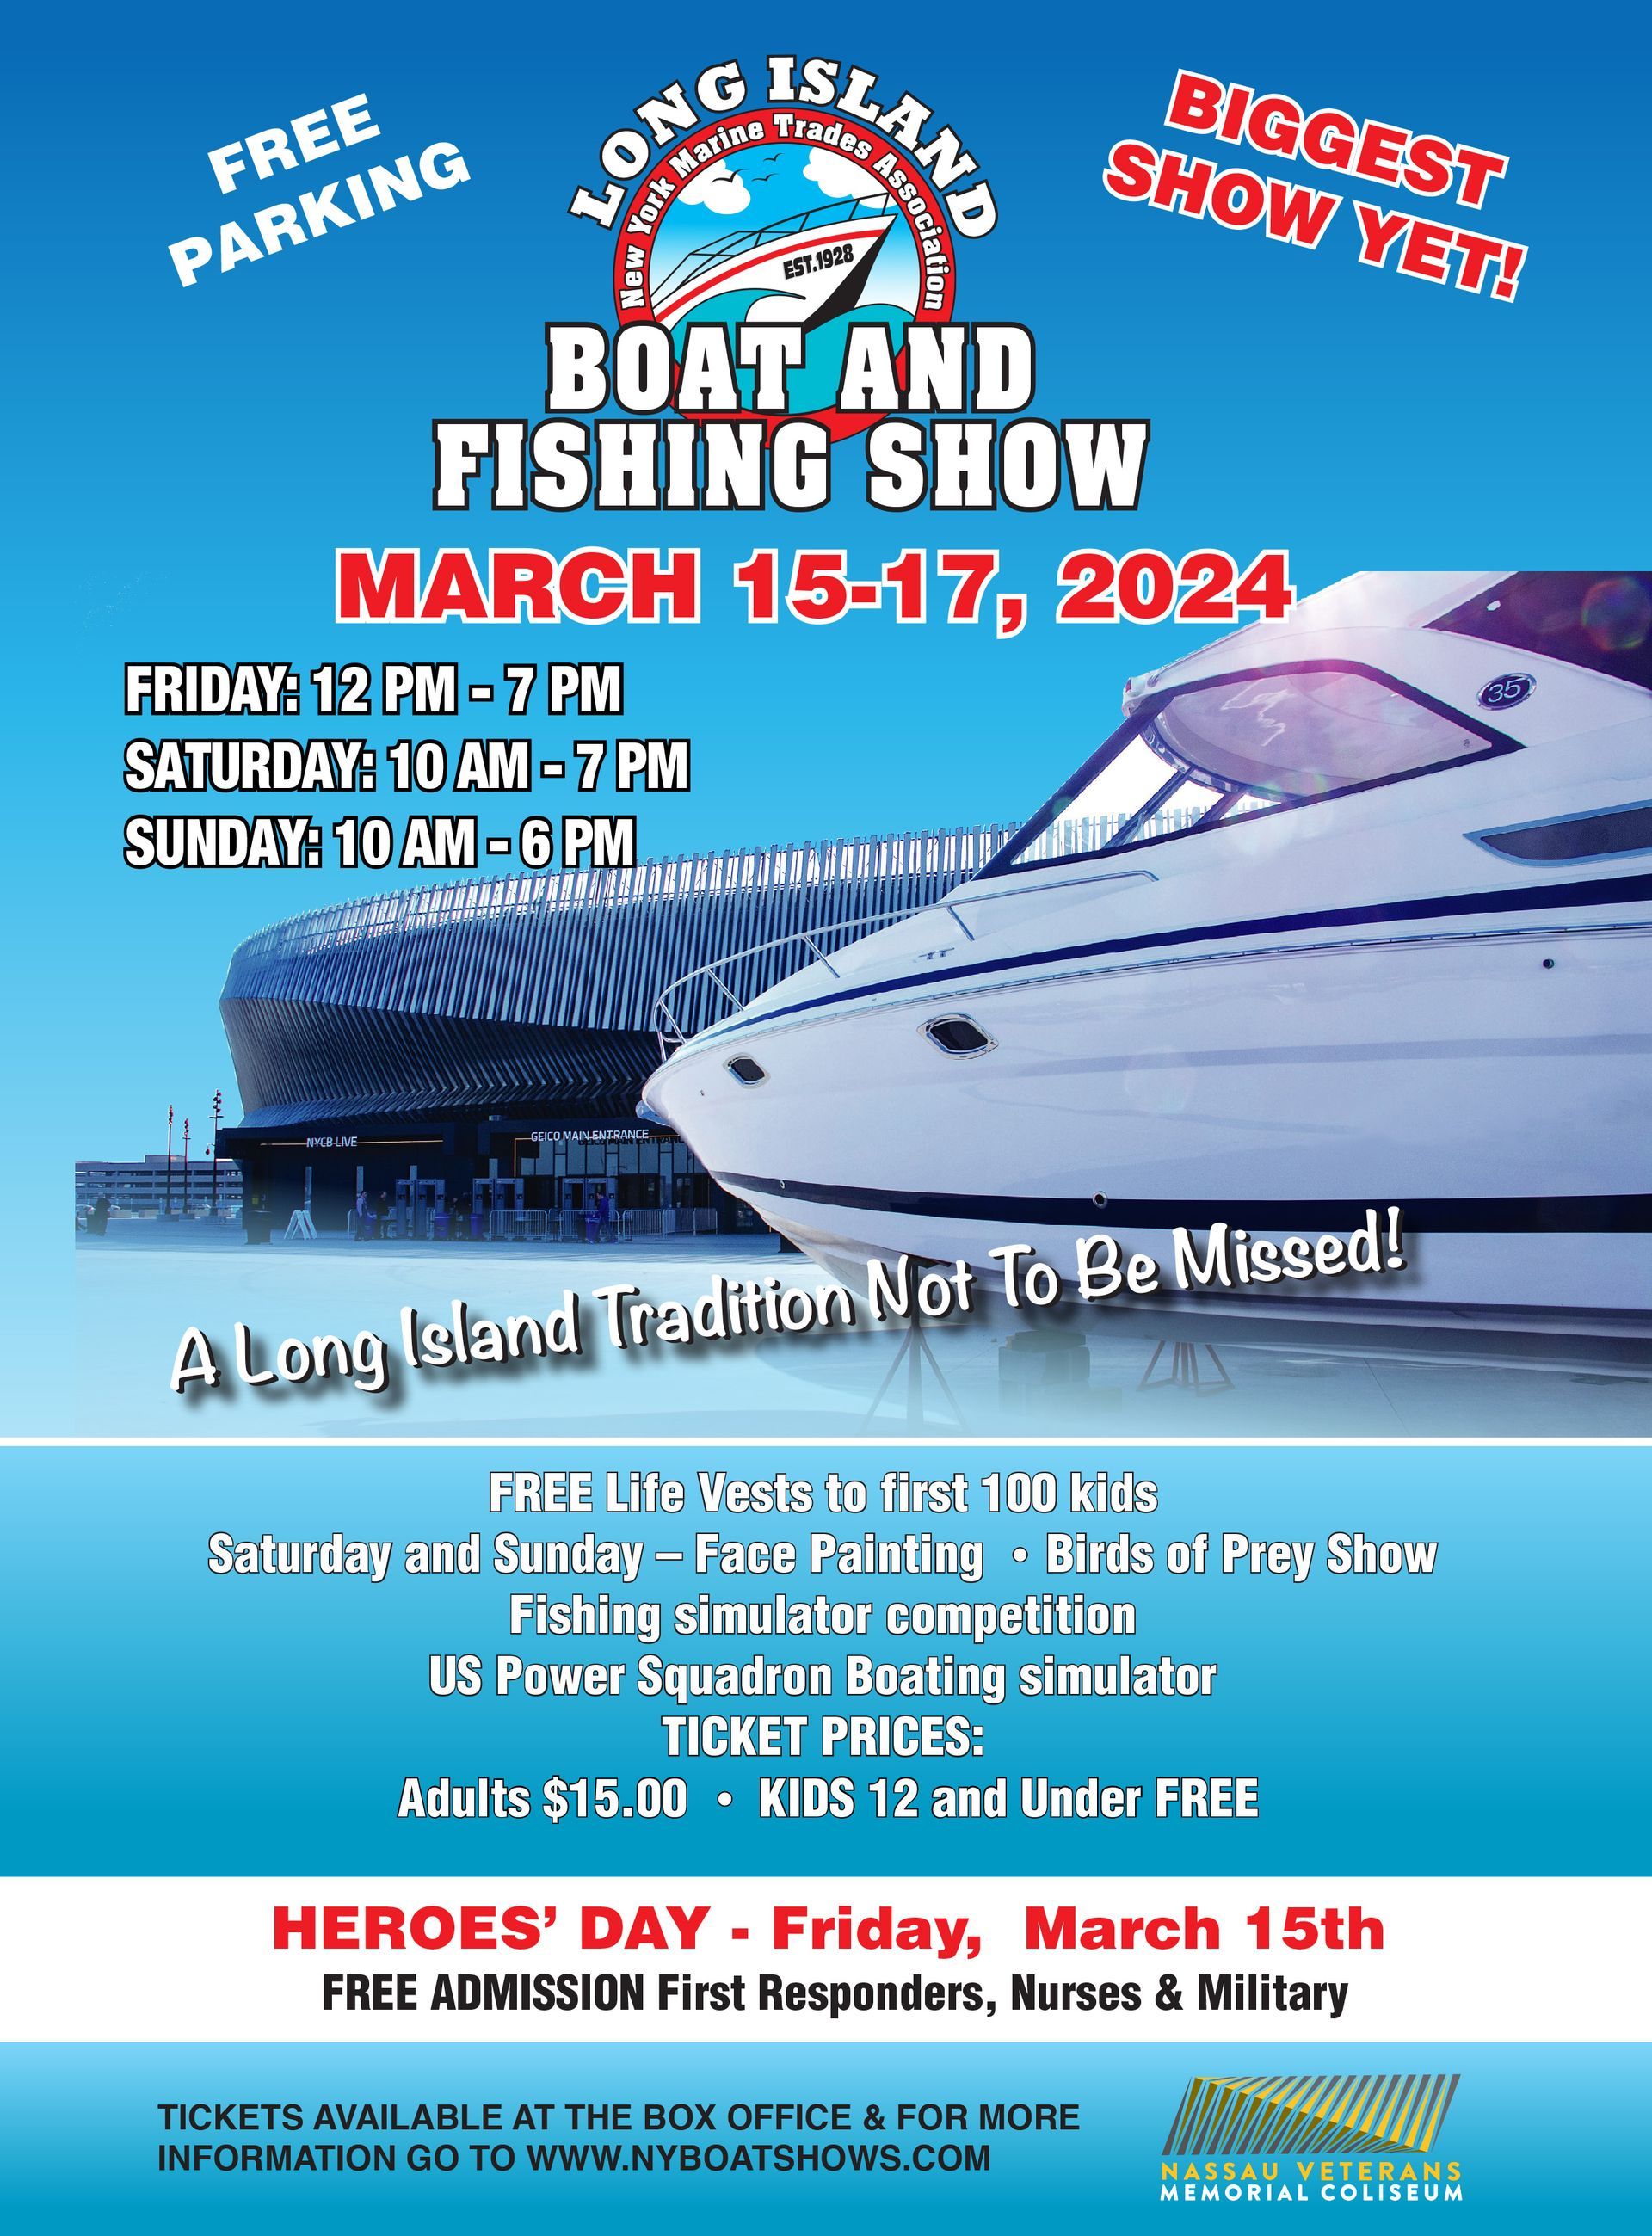 Boat and Fishing Show (March 15-17, 2024) flyer